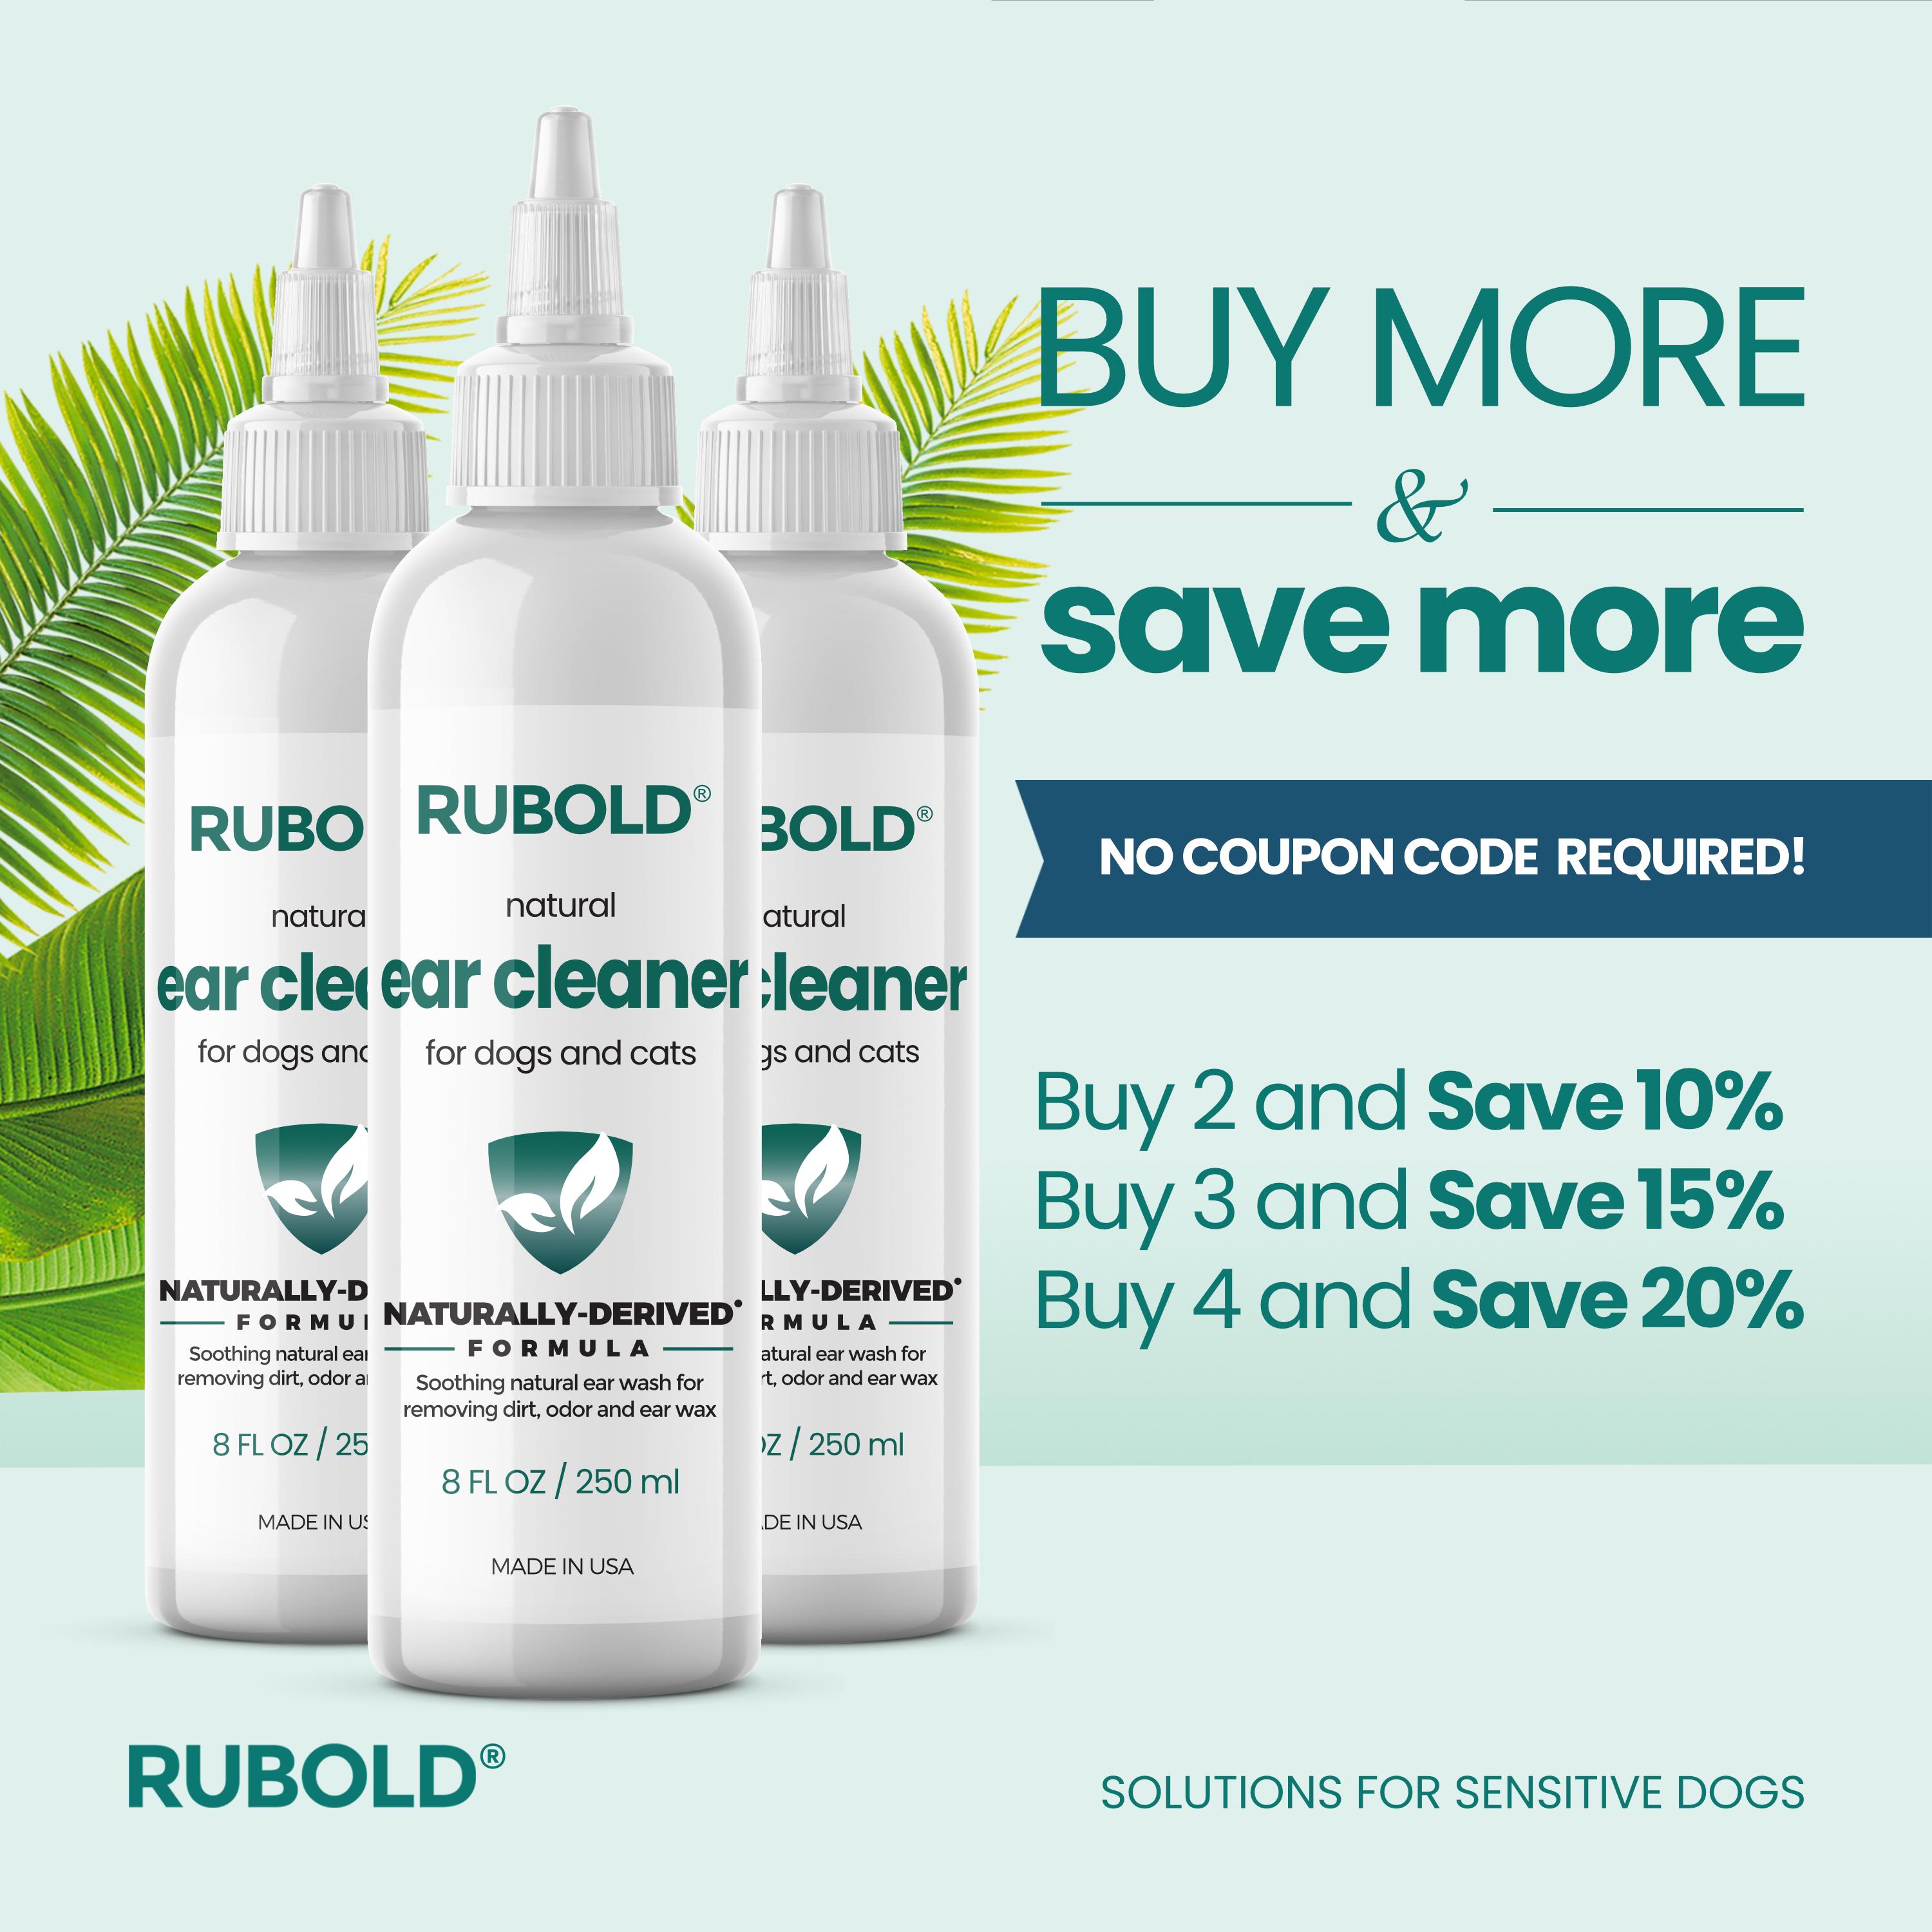 Natural Ear Cleaner for Pets - RUBOLD Dog Products for Pet Parents